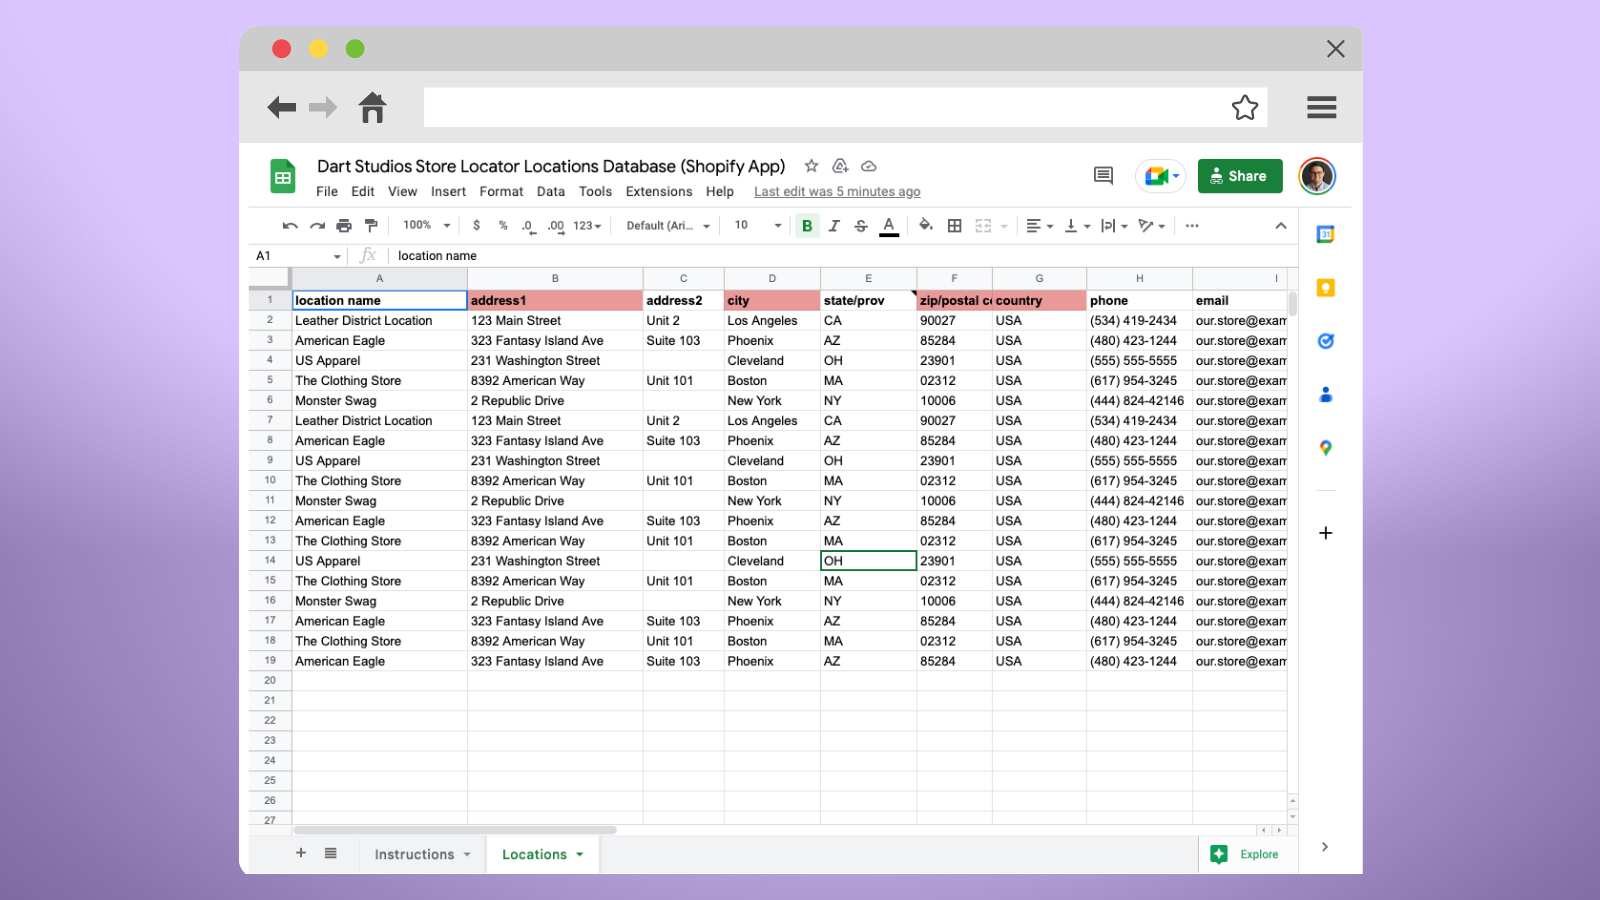 Manage store locations via Google Sheets